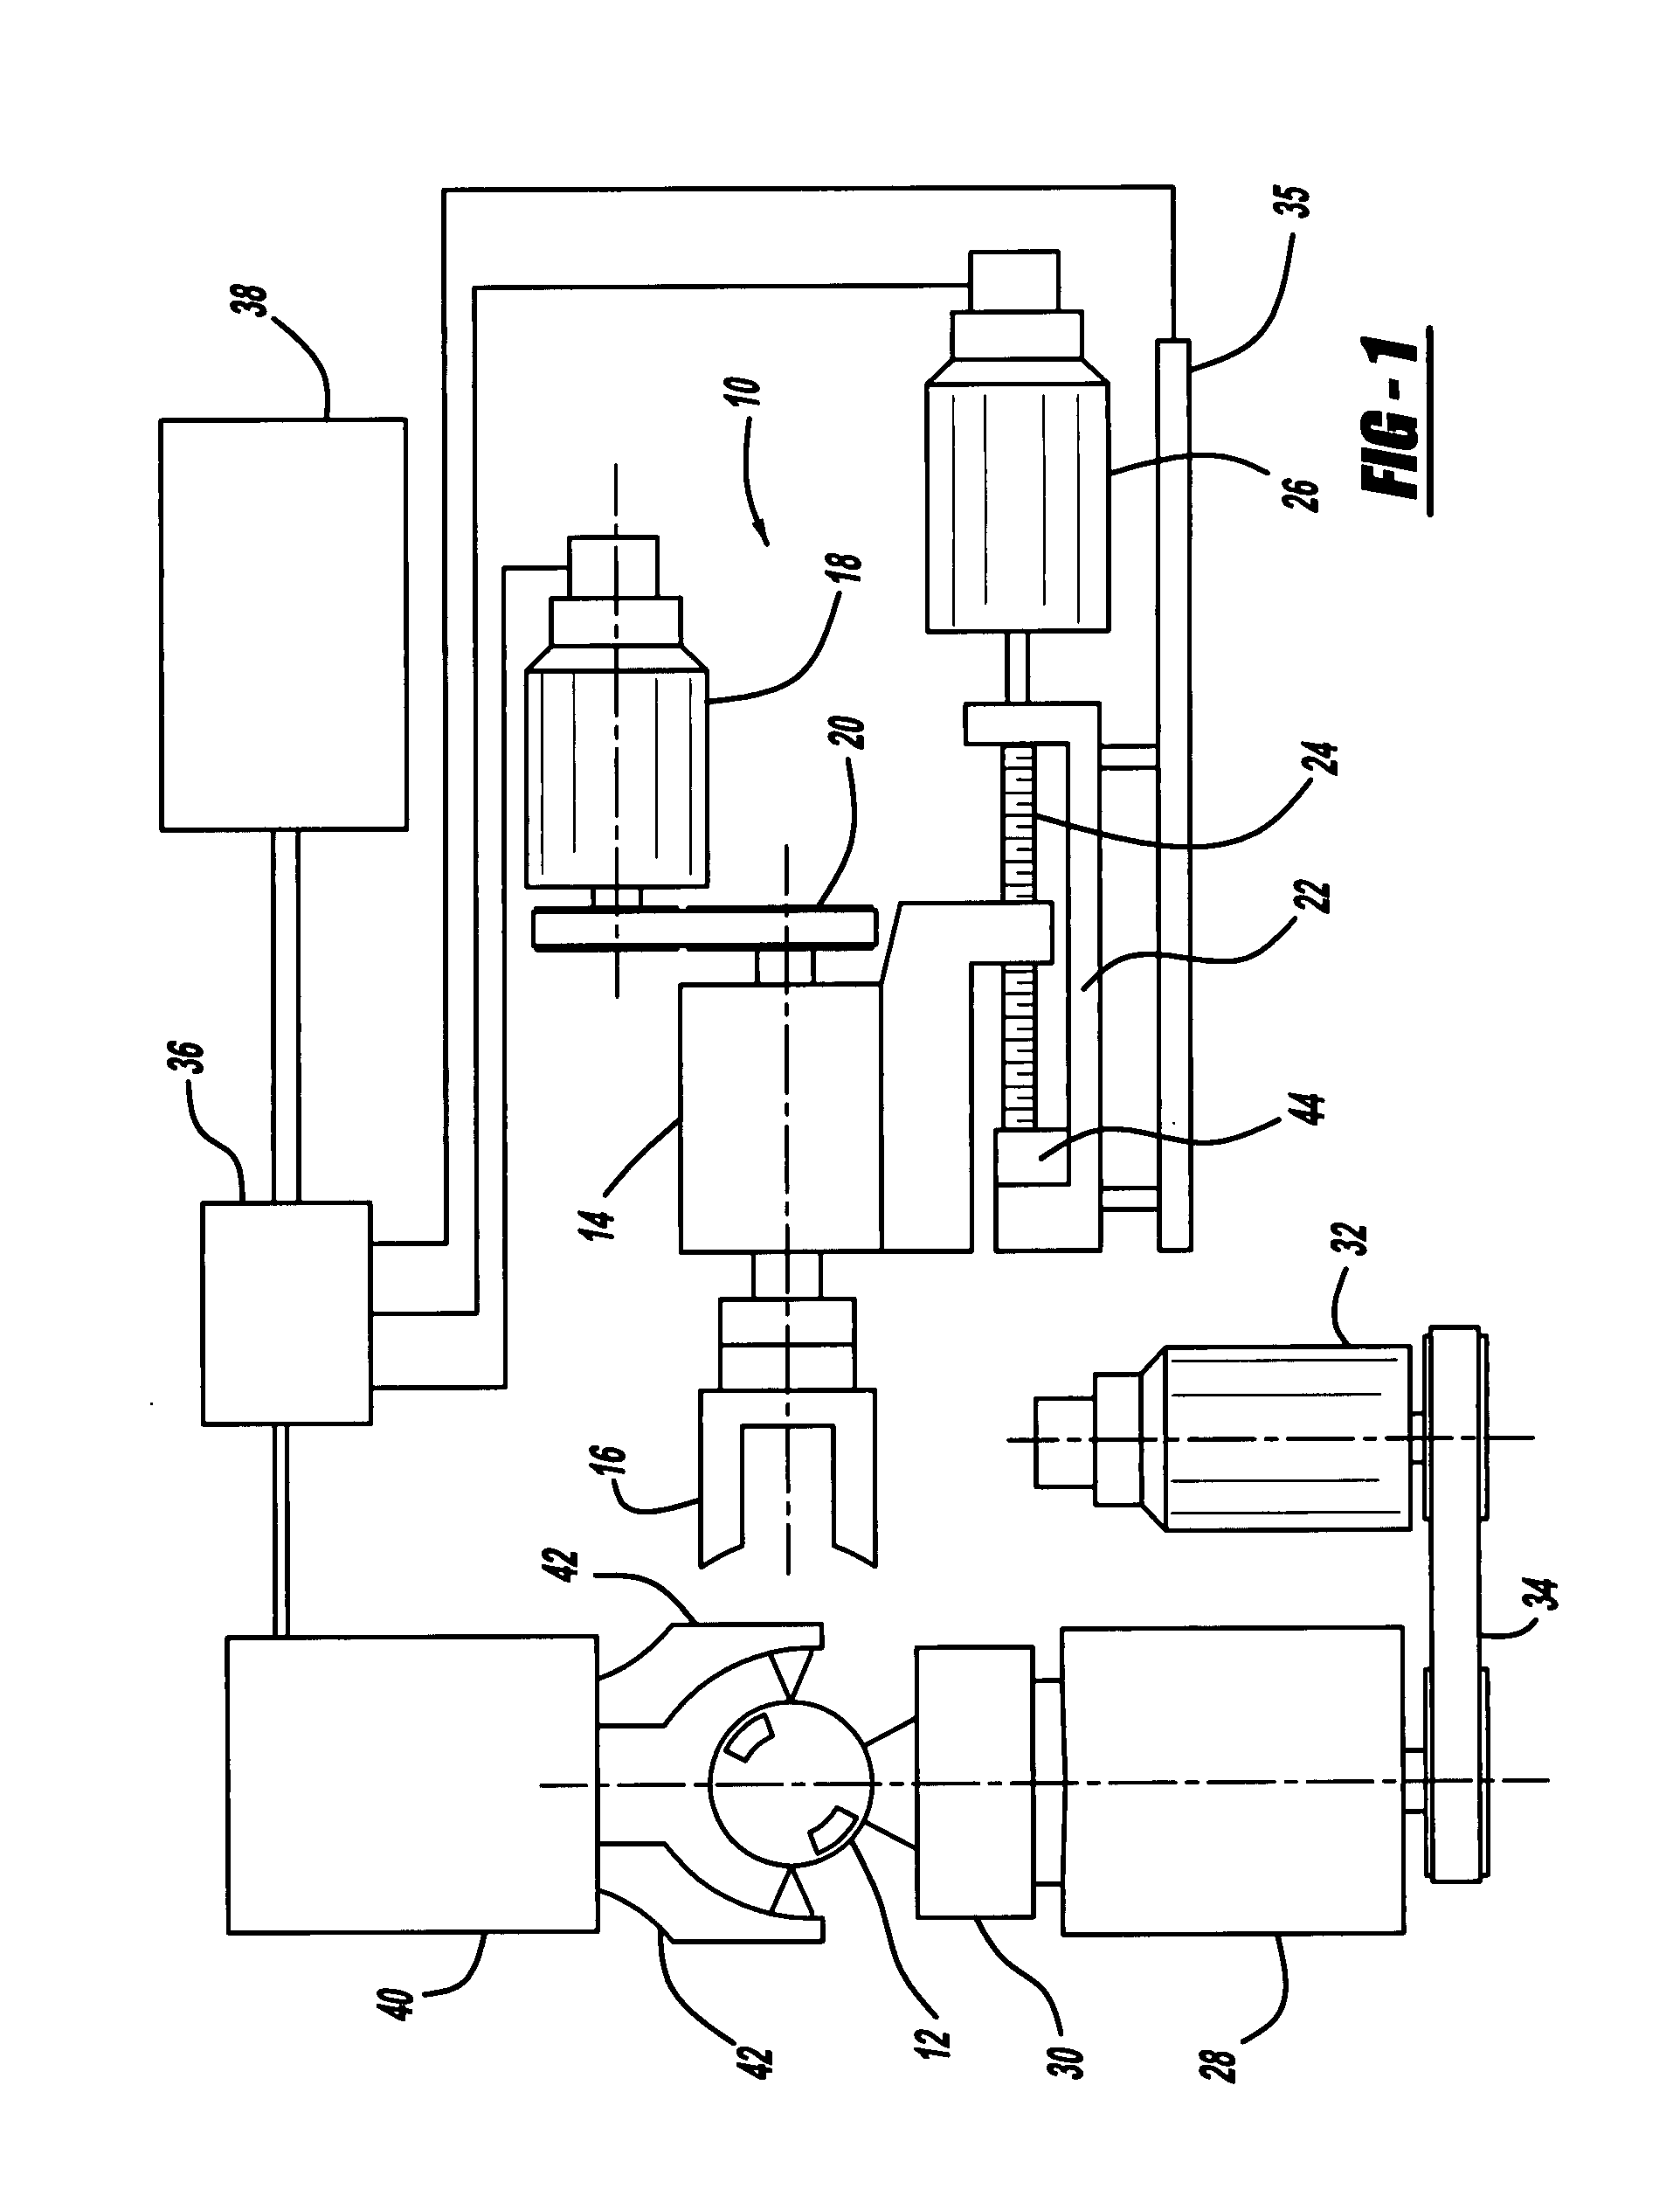 Method and apparatus for finishing a workpiece